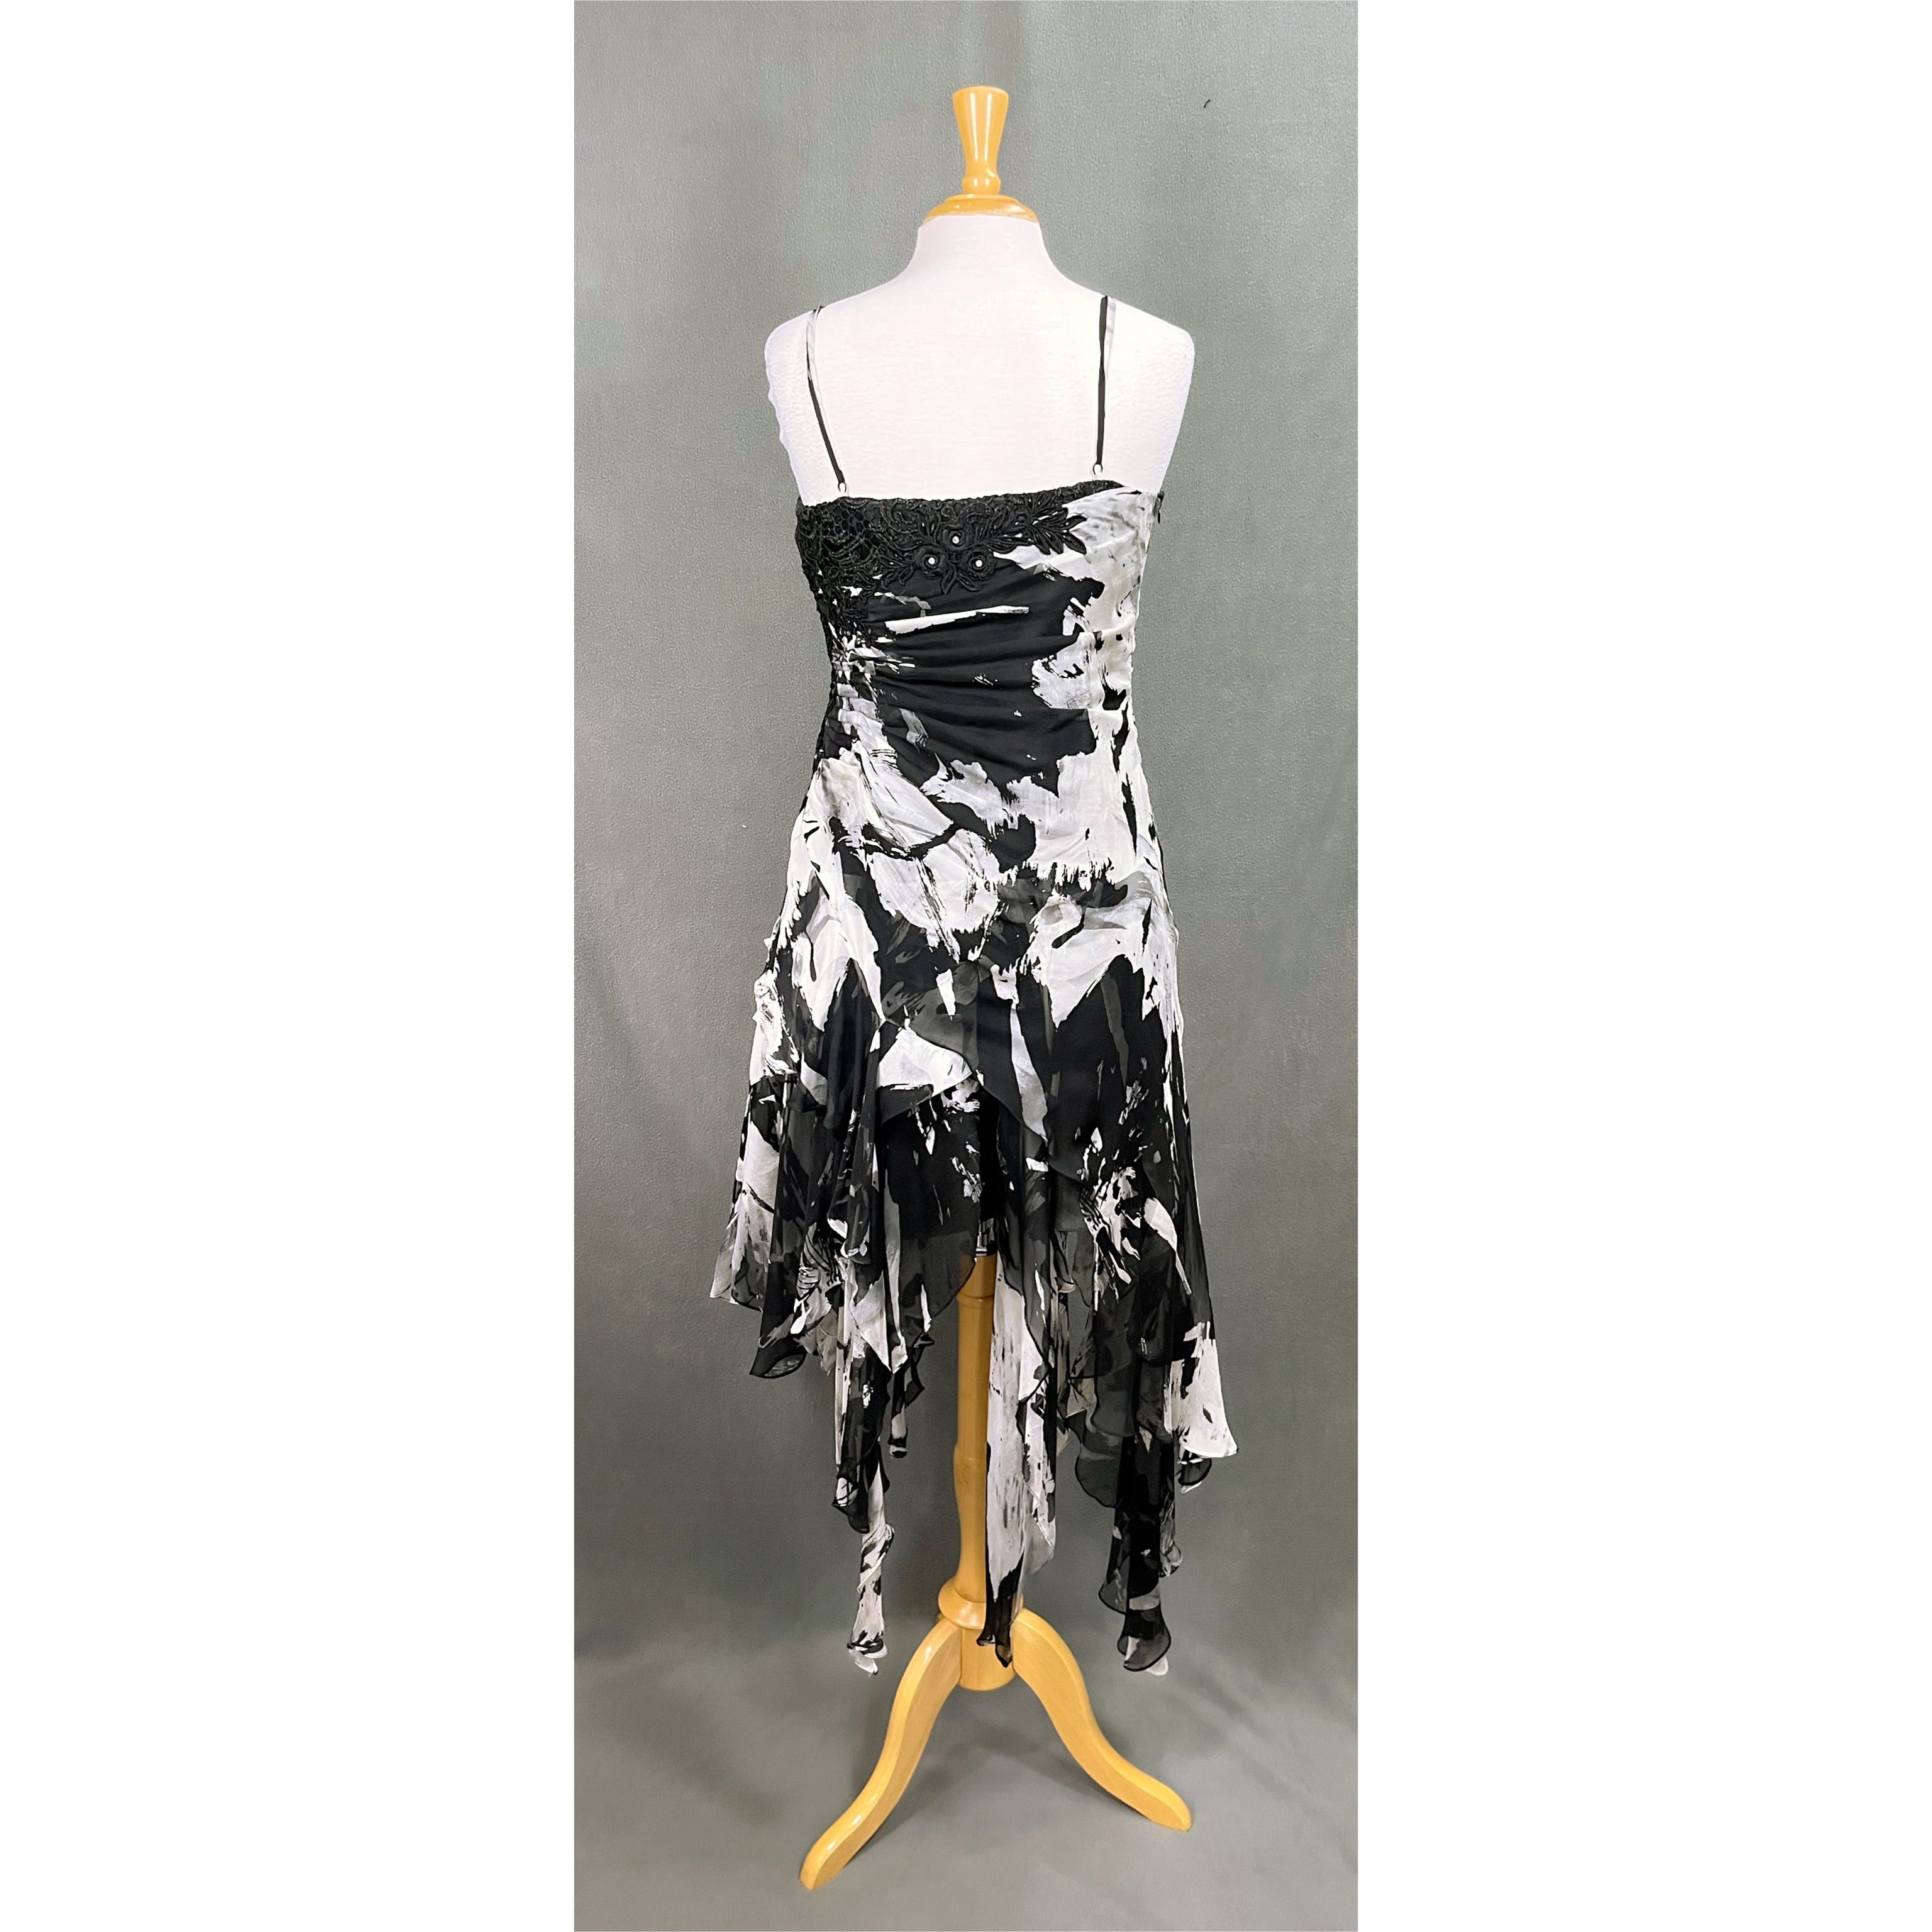 Cartise black and white dress, size 10